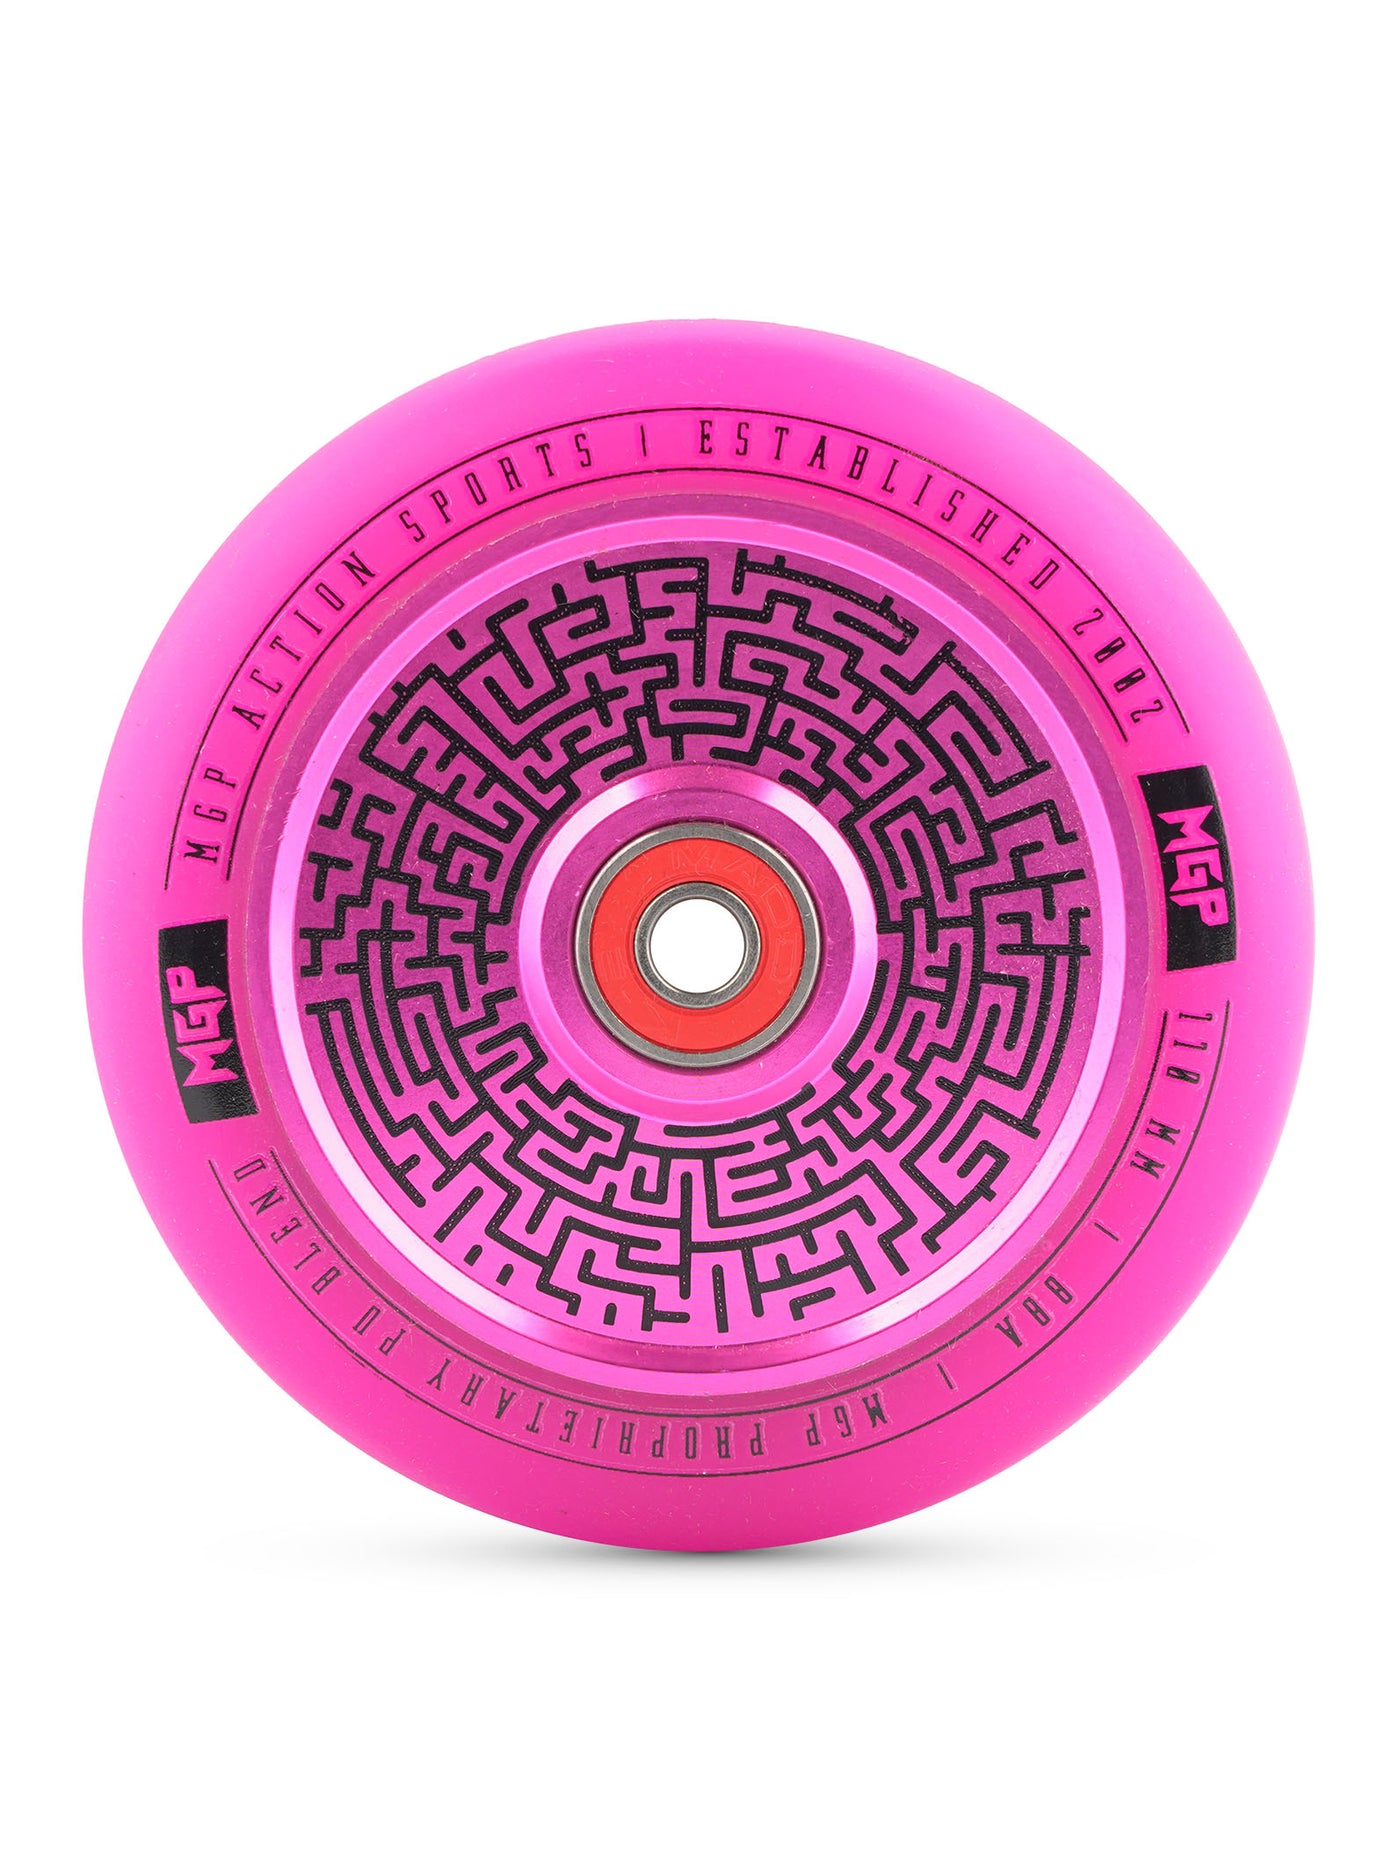 MFX Madd Gear MGP Pro Scooter Wheel stunt trick hollow core metal alloy pu replacement pink